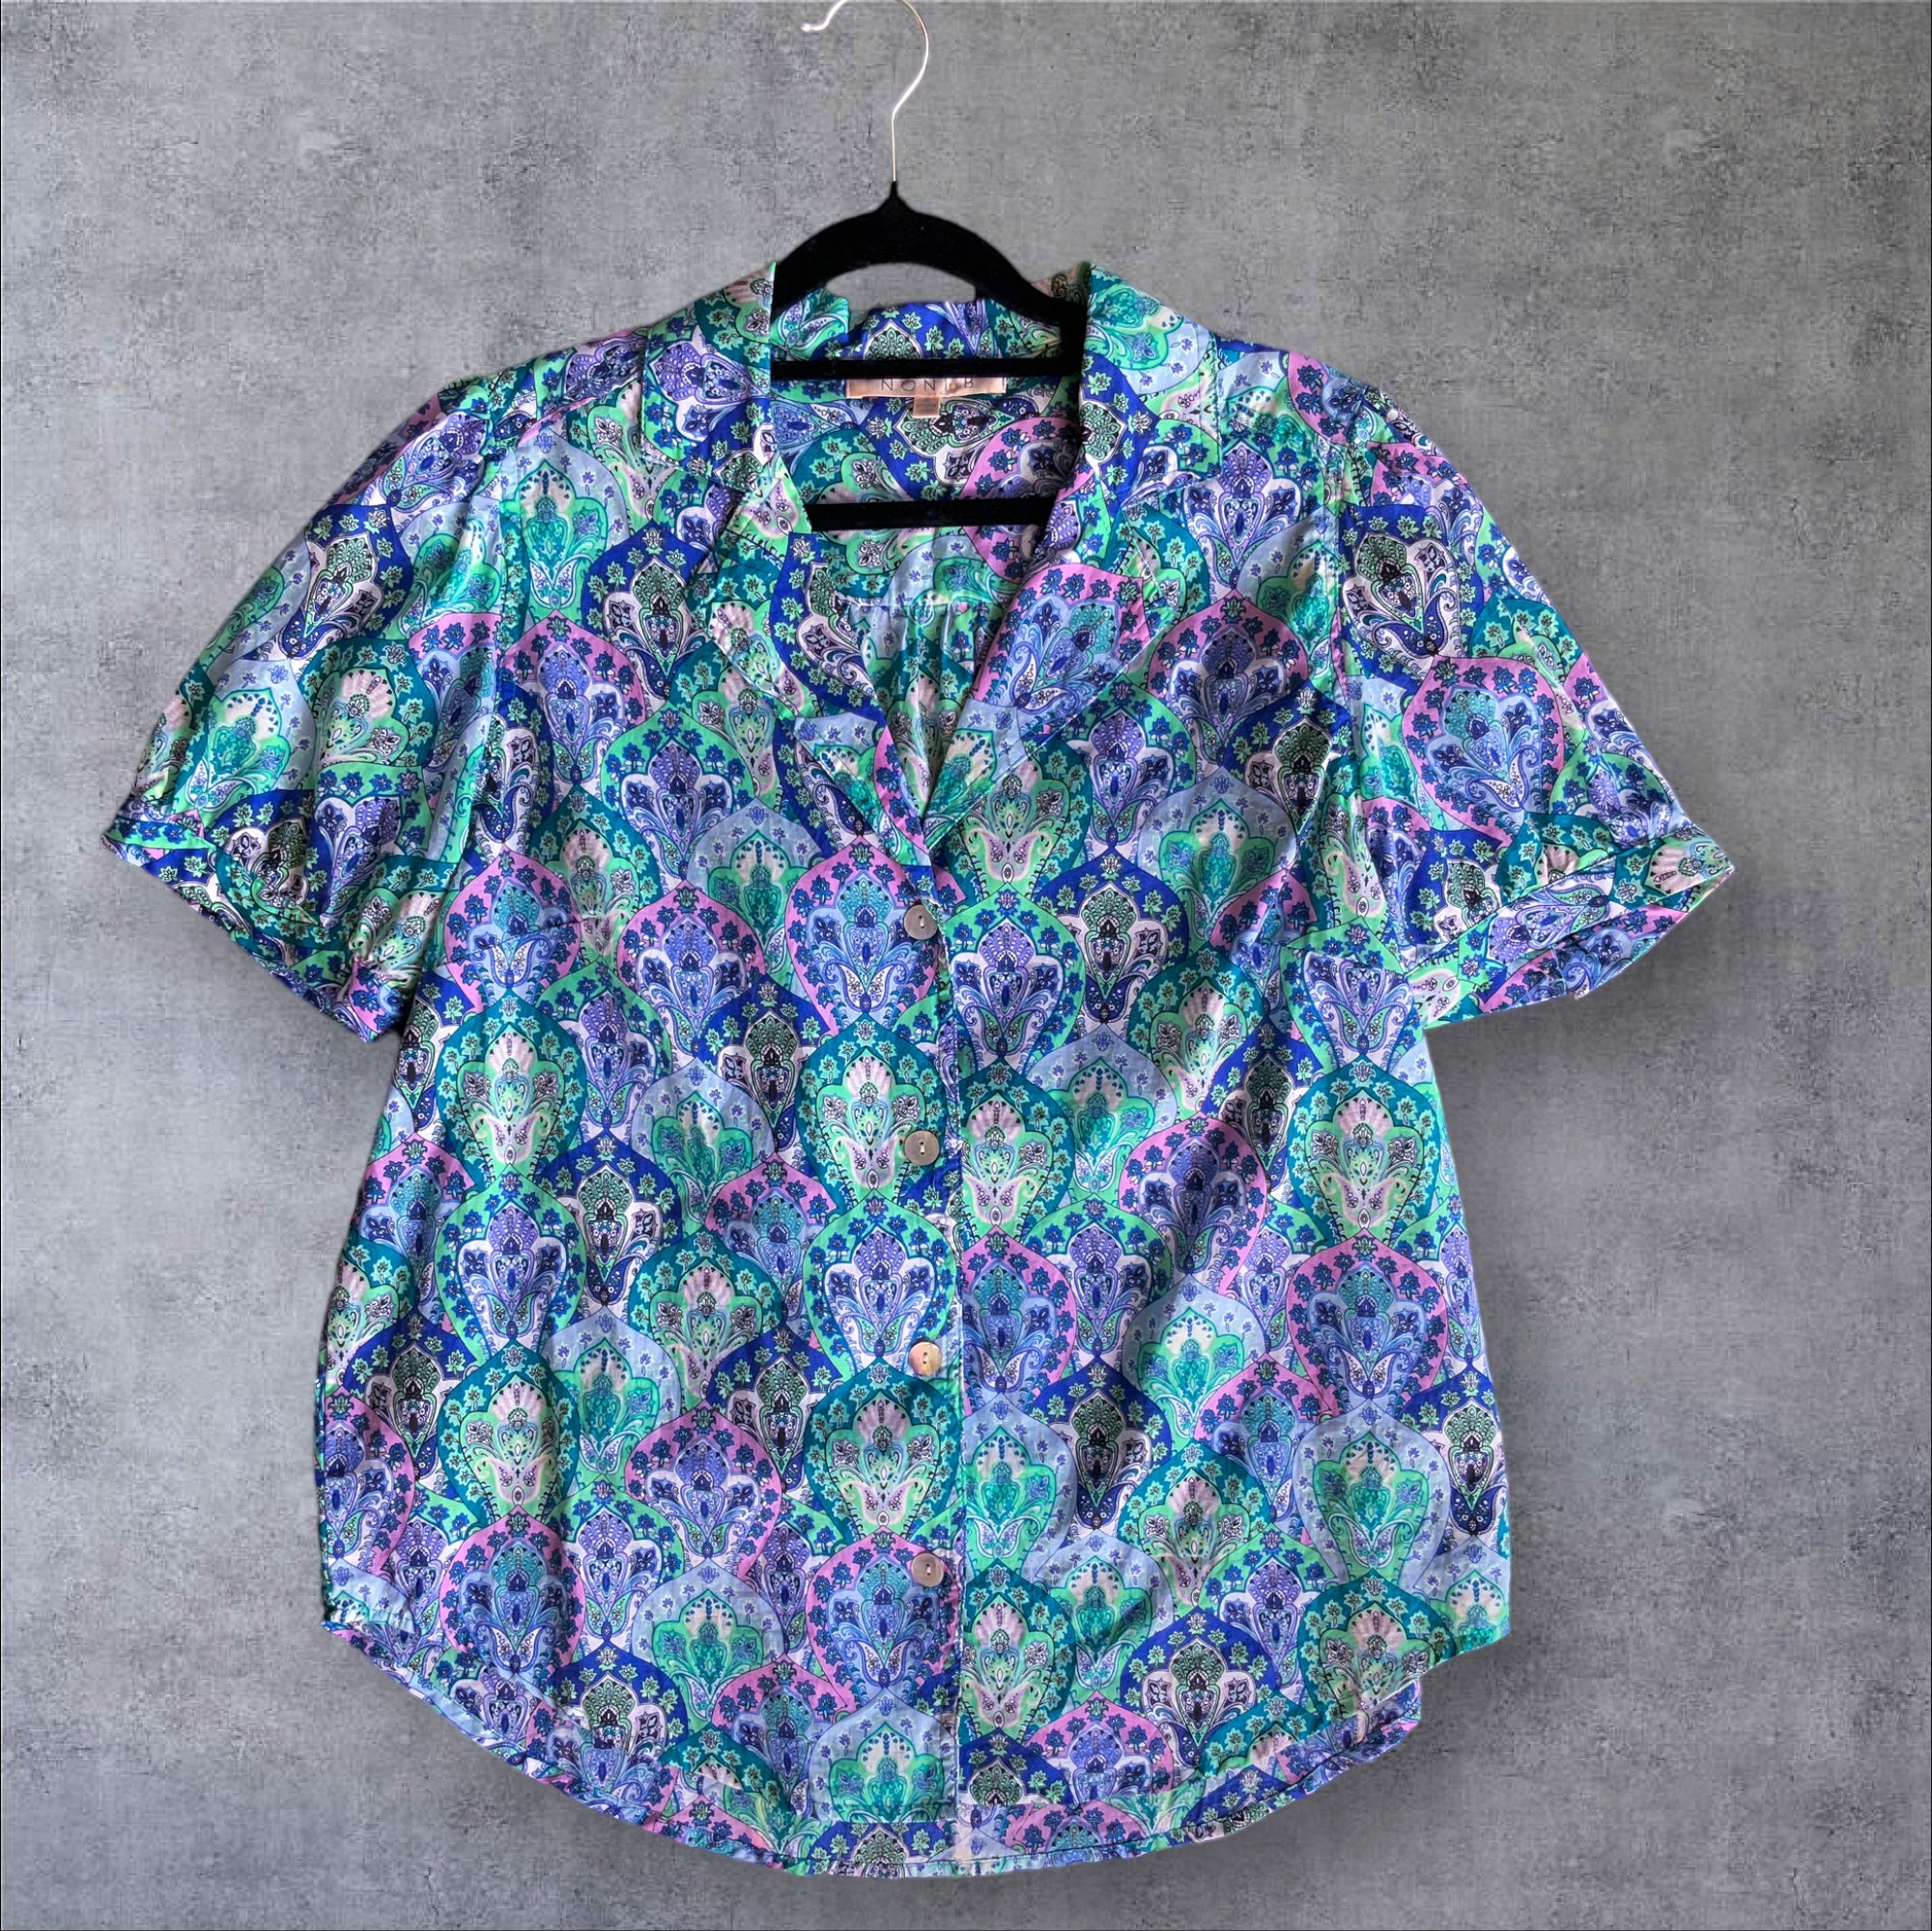 NONI B Cotton Floral Print Short Sleeved Button Up Shirt - Size 12